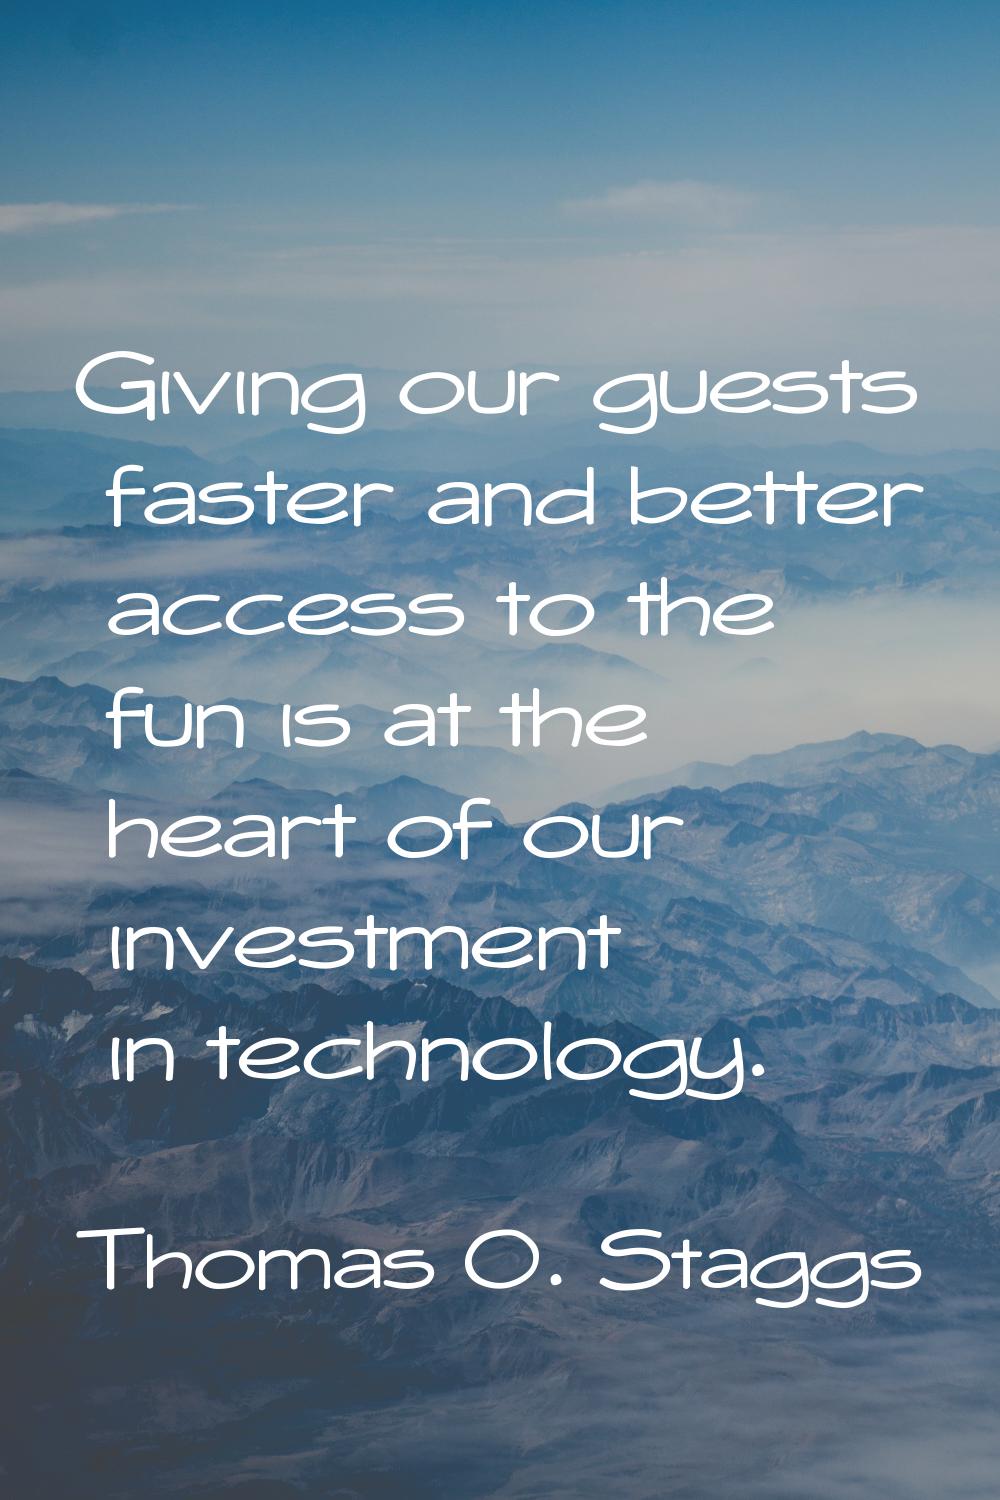 Giving our guests faster and better access to the fun is at the heart of our investment in technolo